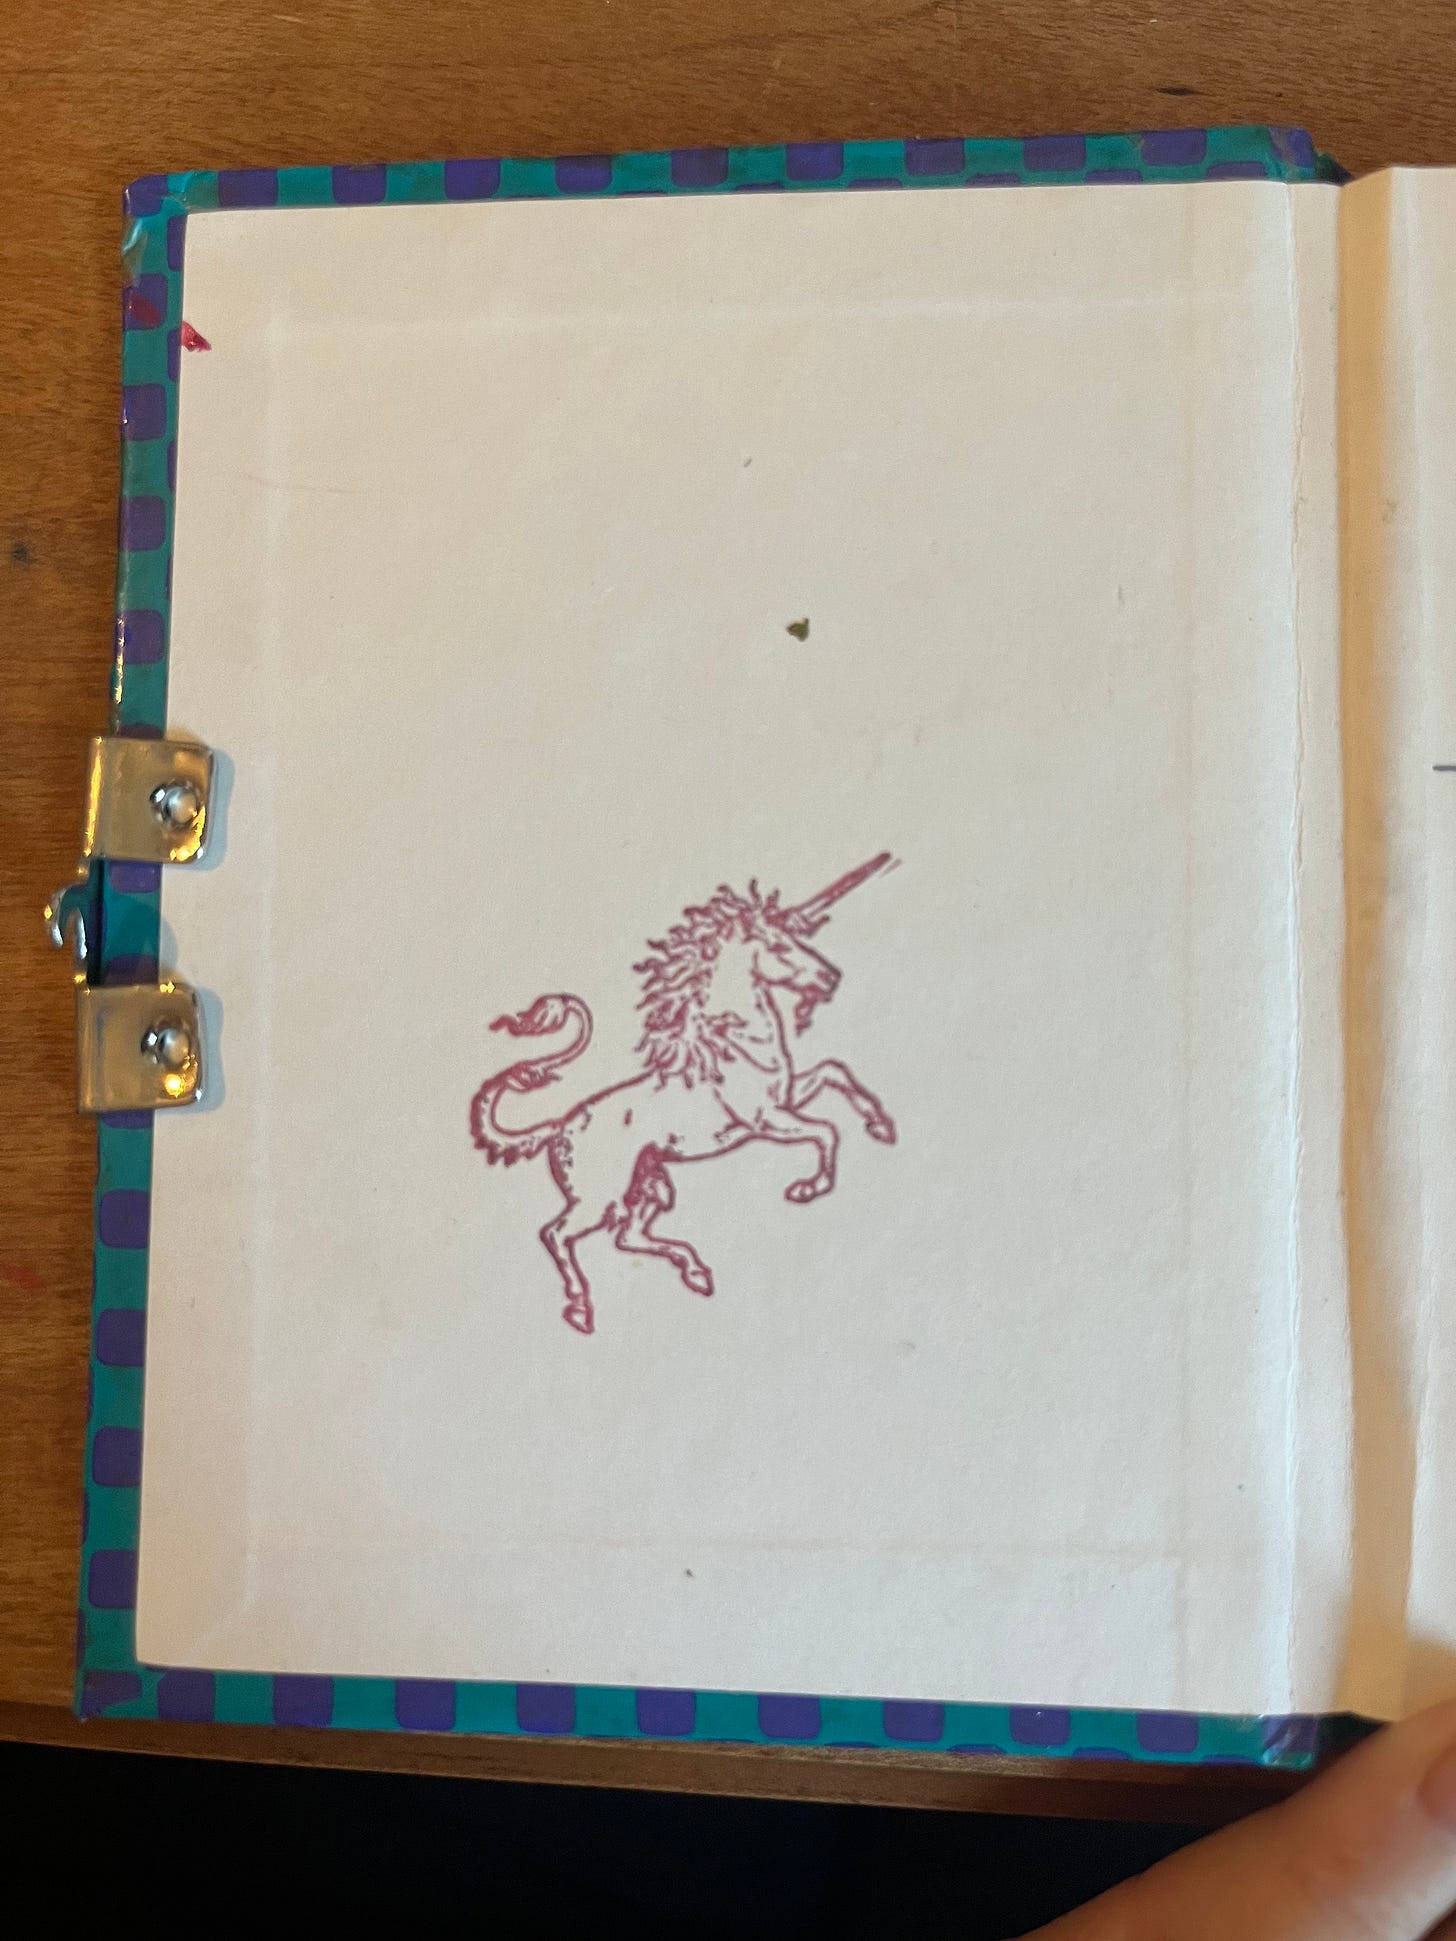 The interior front cover of the diary has a unicorn stamped on it in pink ink.